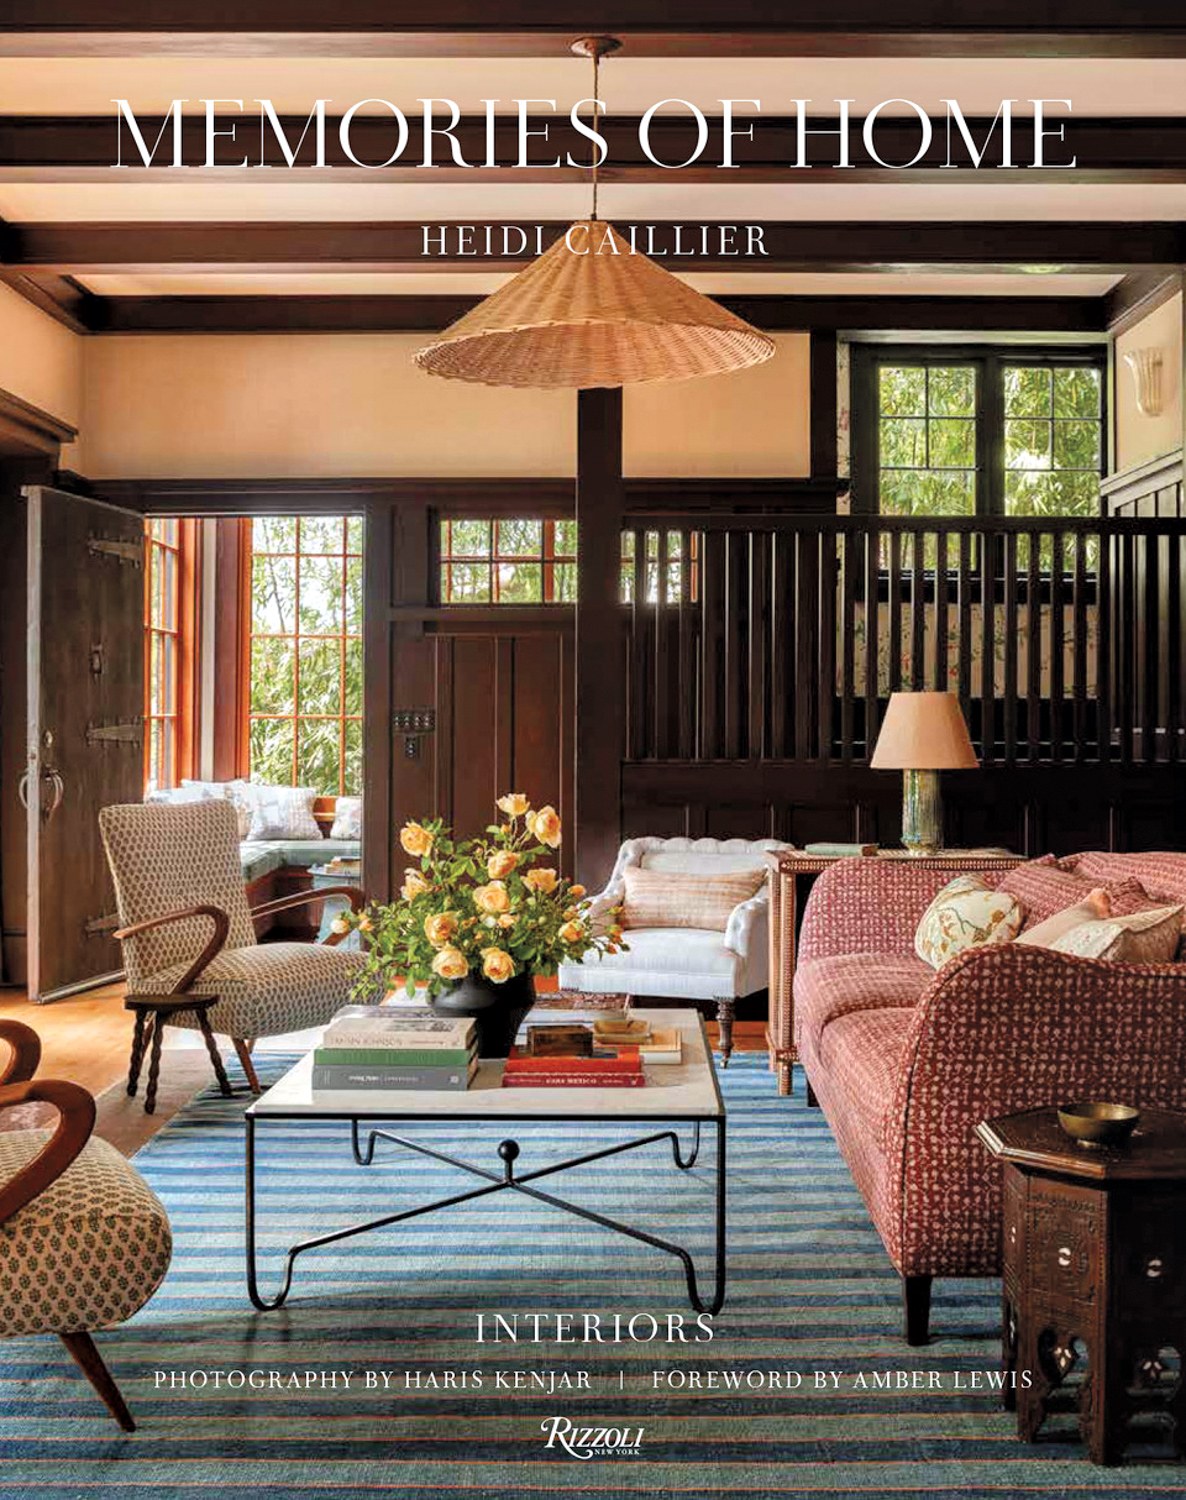 Cover of "Memories of Home" by designer Heidi Caillier featuring living room with mixed patterns